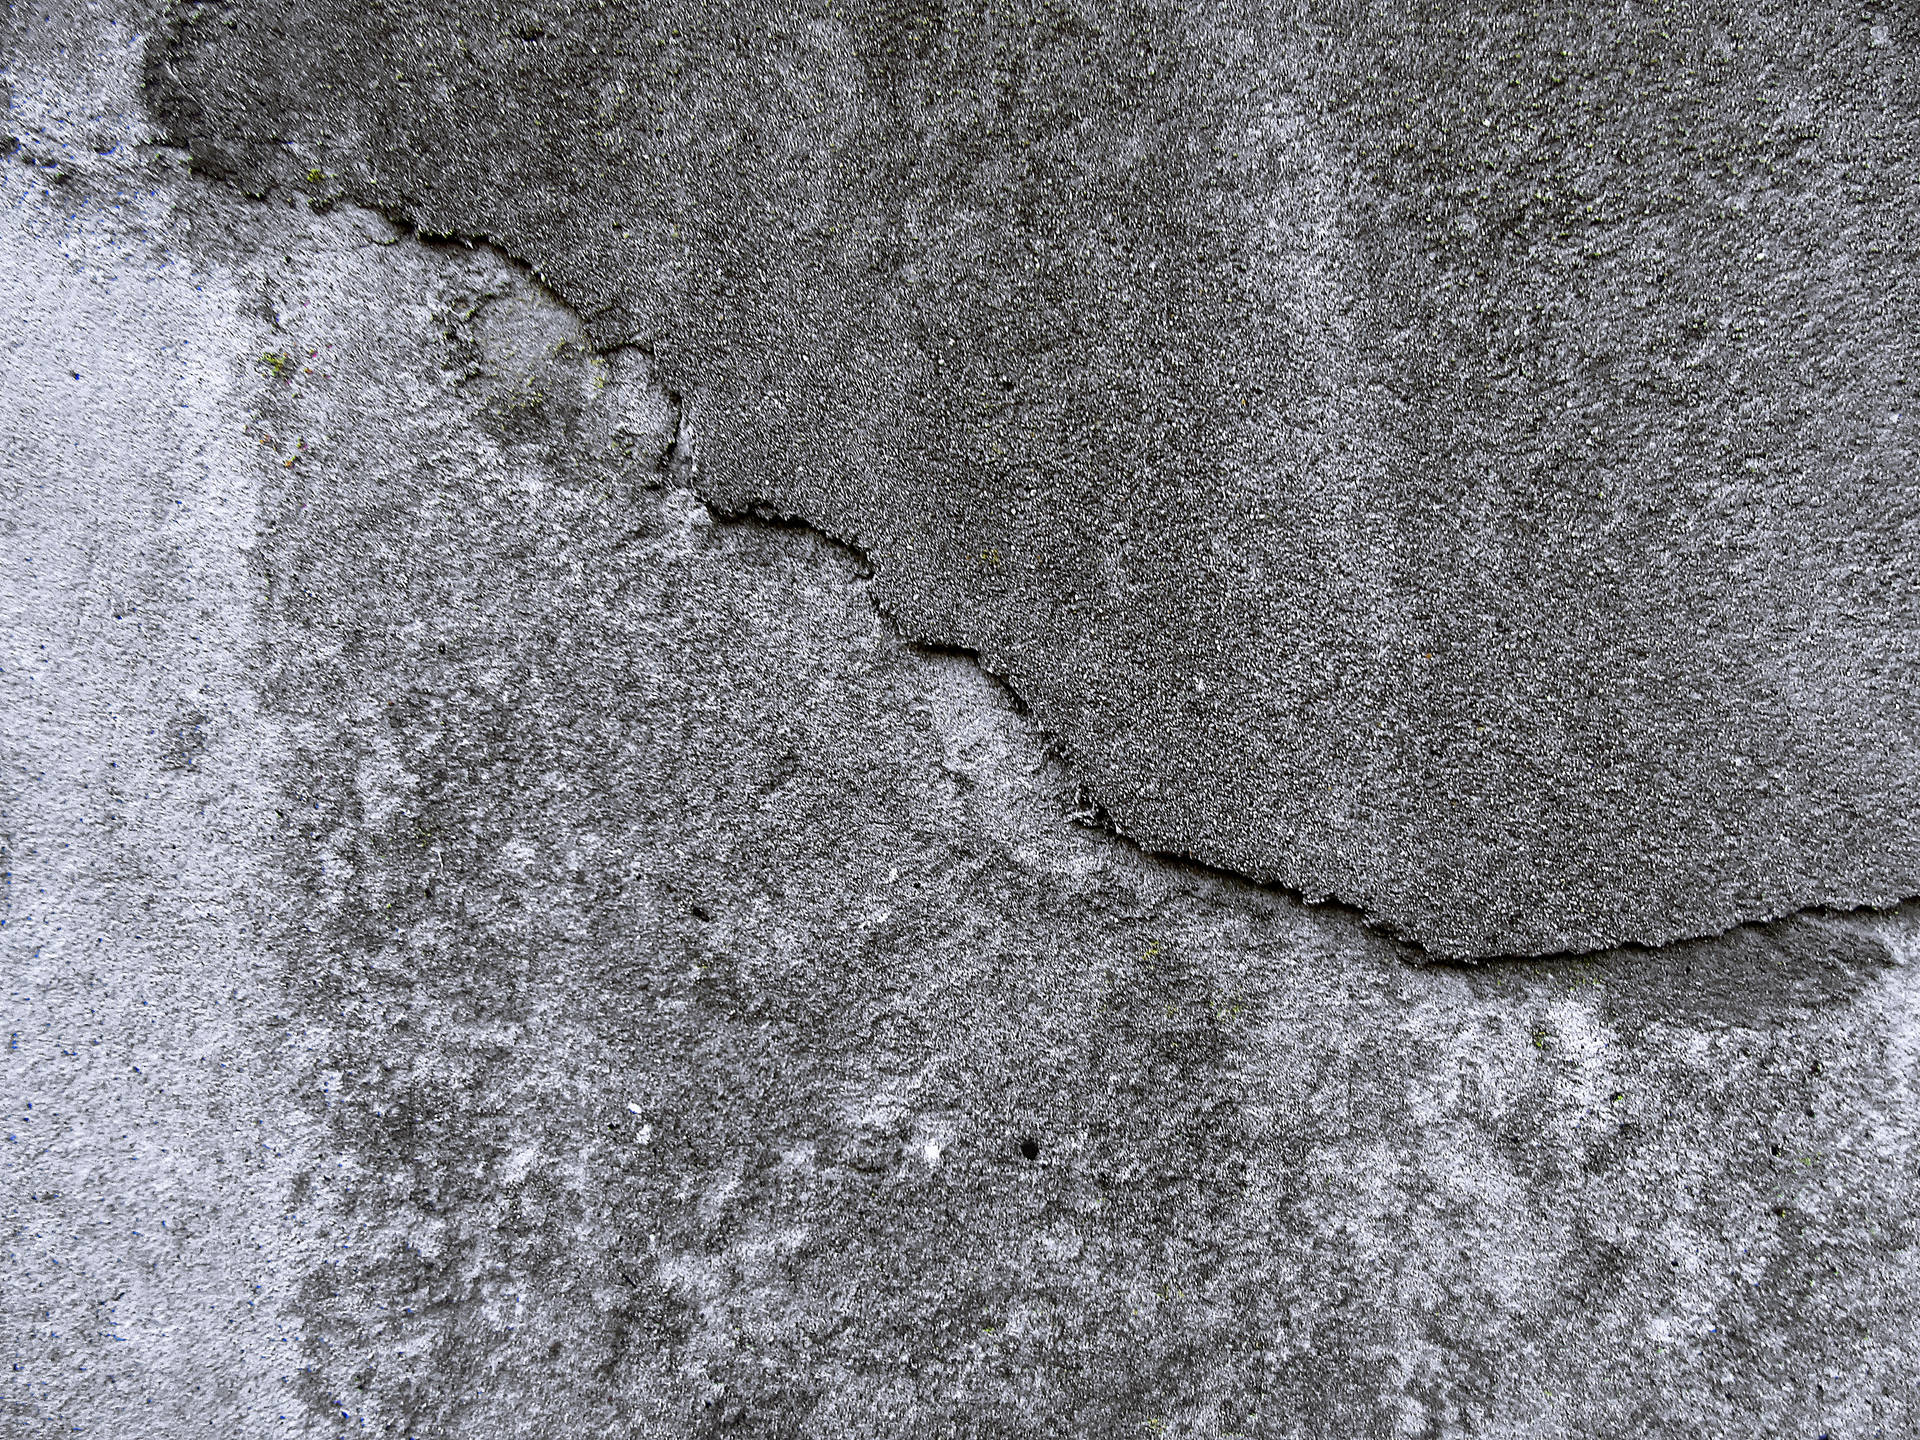 Concrete 3500X2625 Wallpaper and Background Image